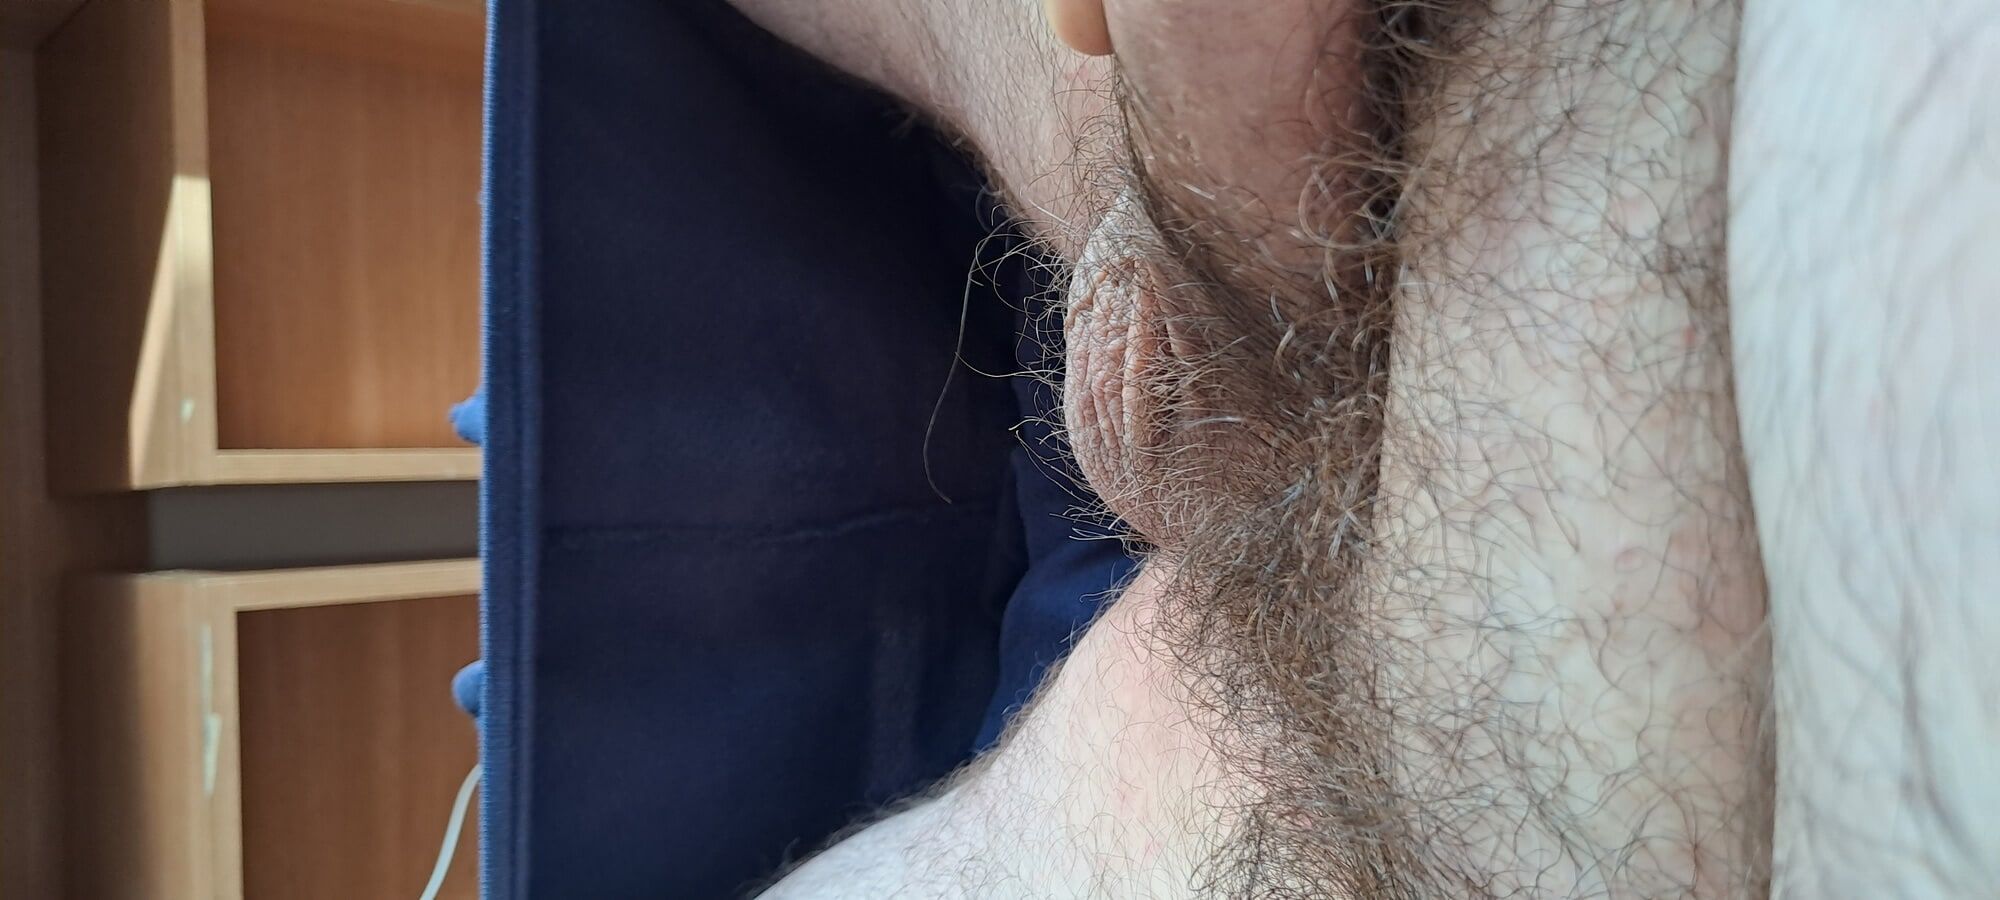 daddy's big hairy cock #4